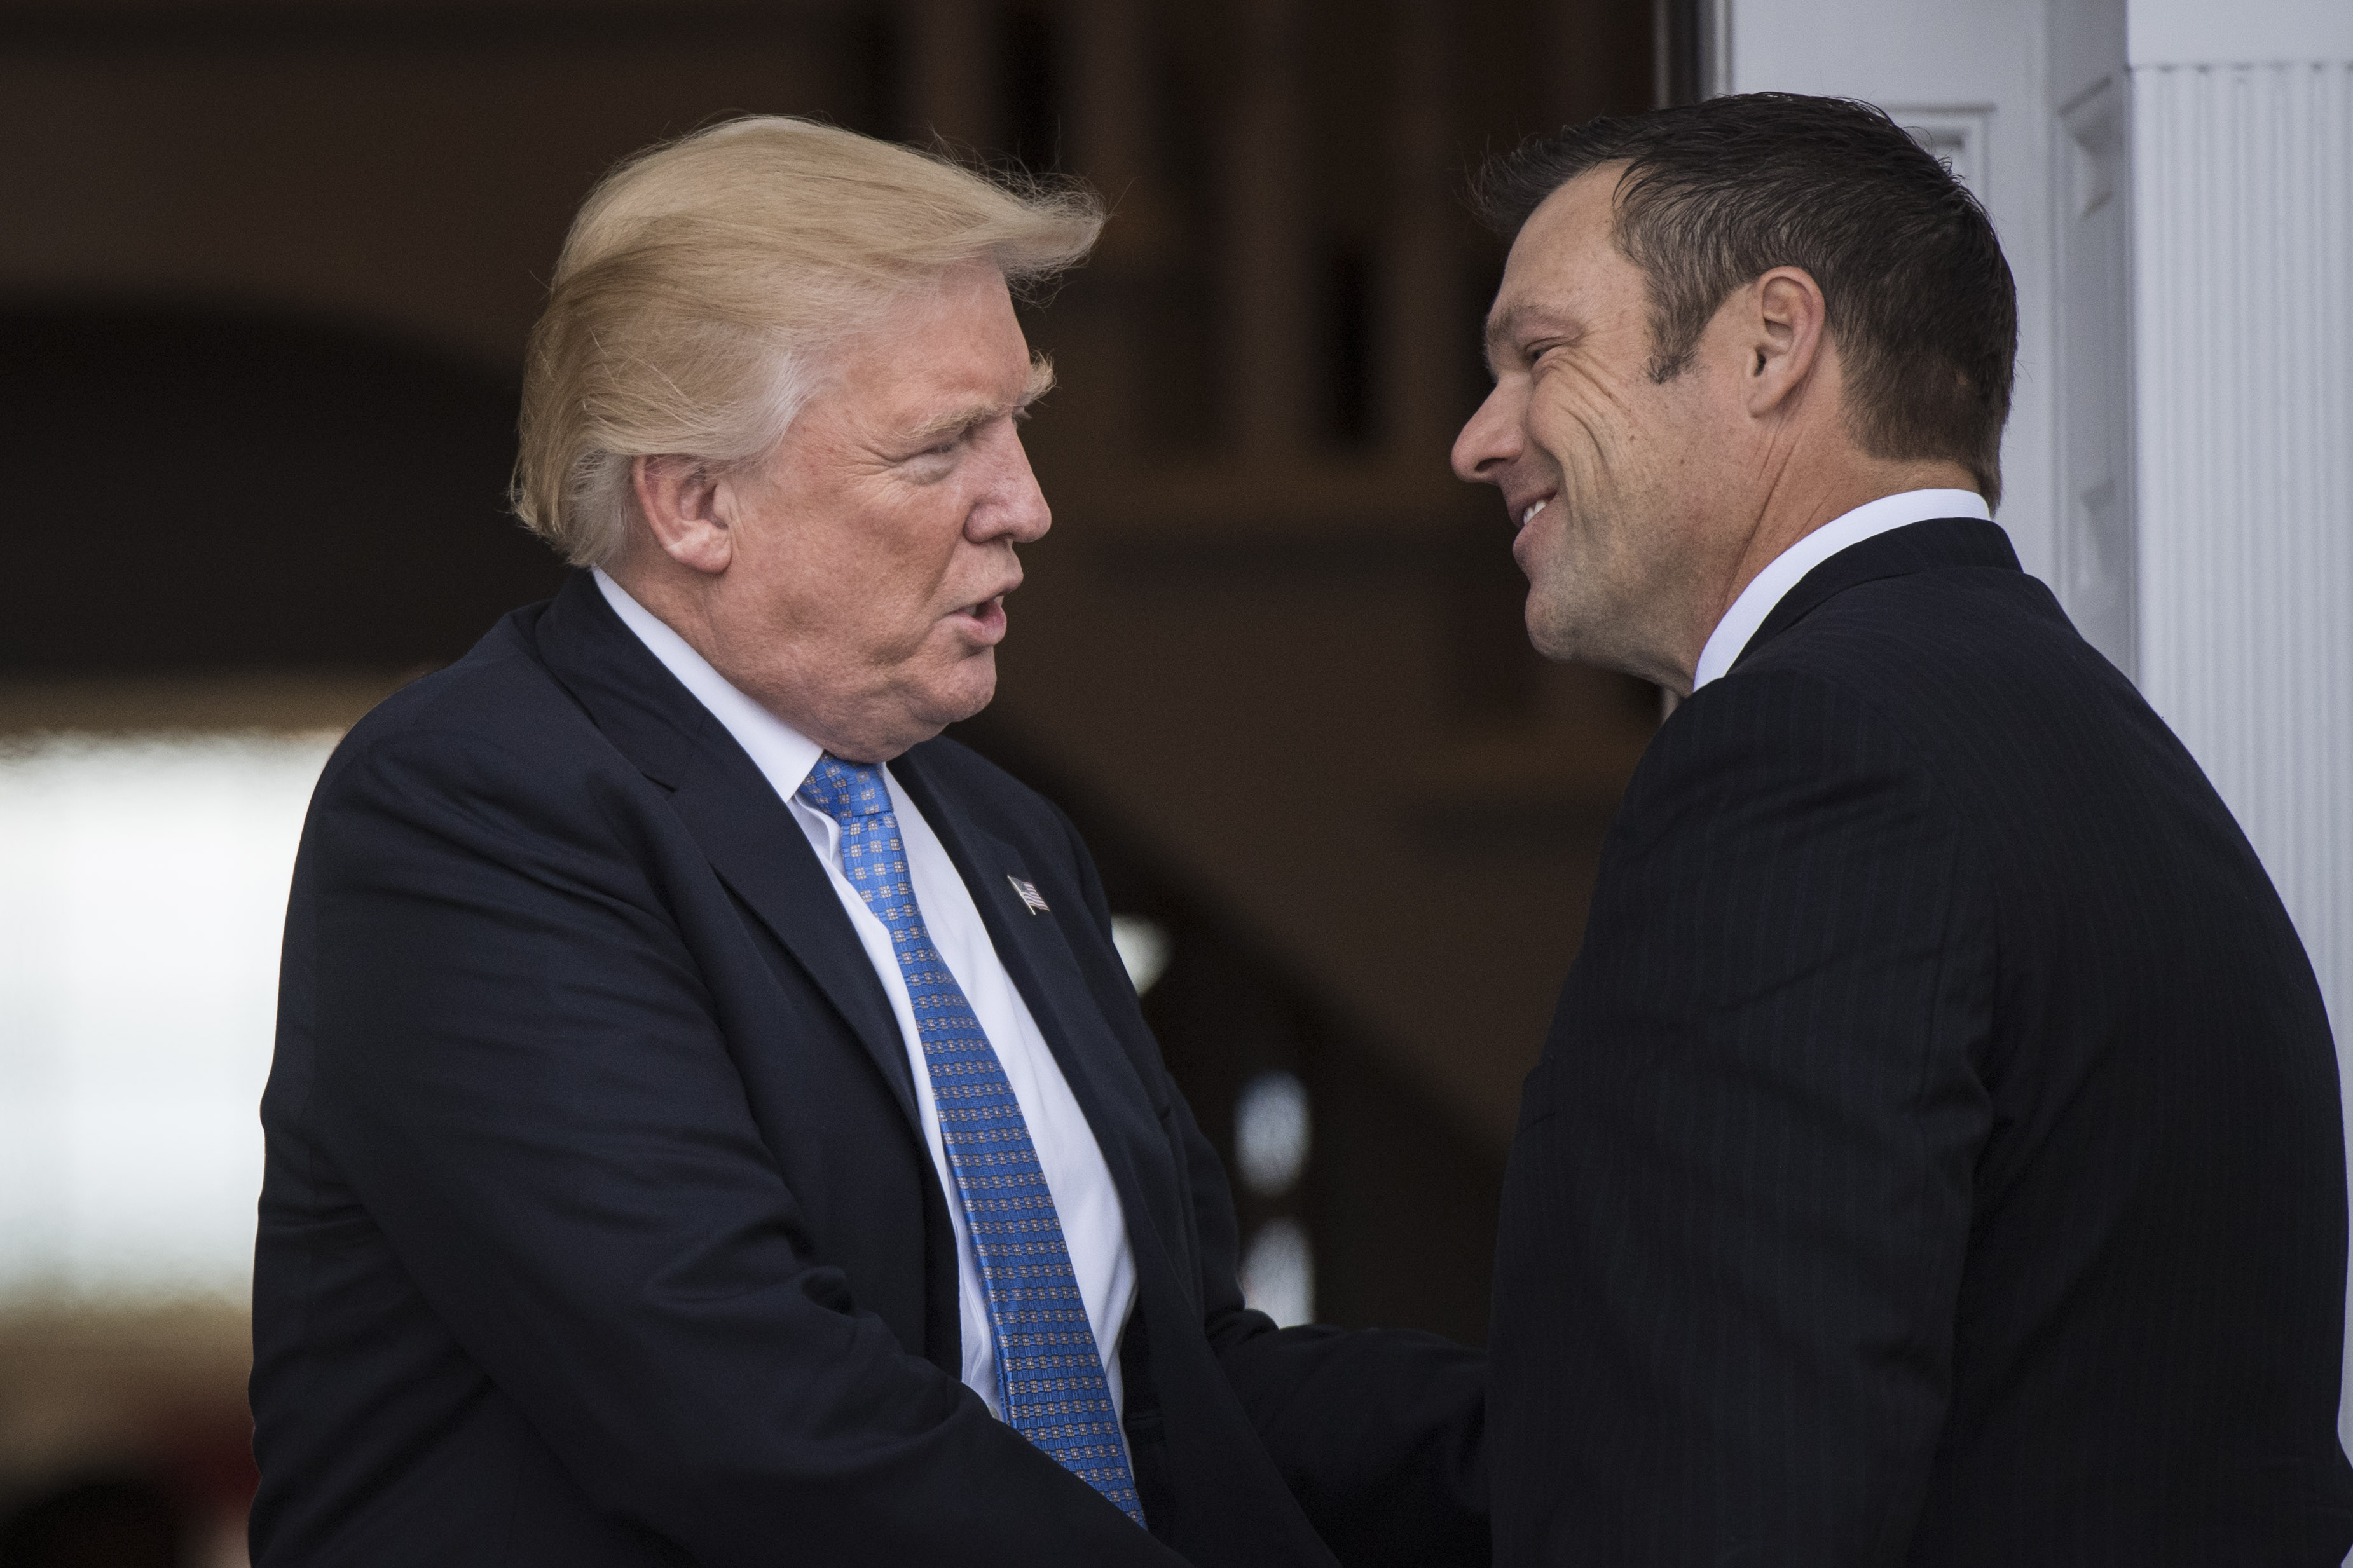 President-elect Donald Trump greets Kansas Secretary of State, Kris Kobach, at the clubhouse at Trump National Golf Club Bedminster in Bedminster Township, N.J. on Sunday, Nov. 20, 2016. (The Washington Post--;The Washington Post/Getty Images)